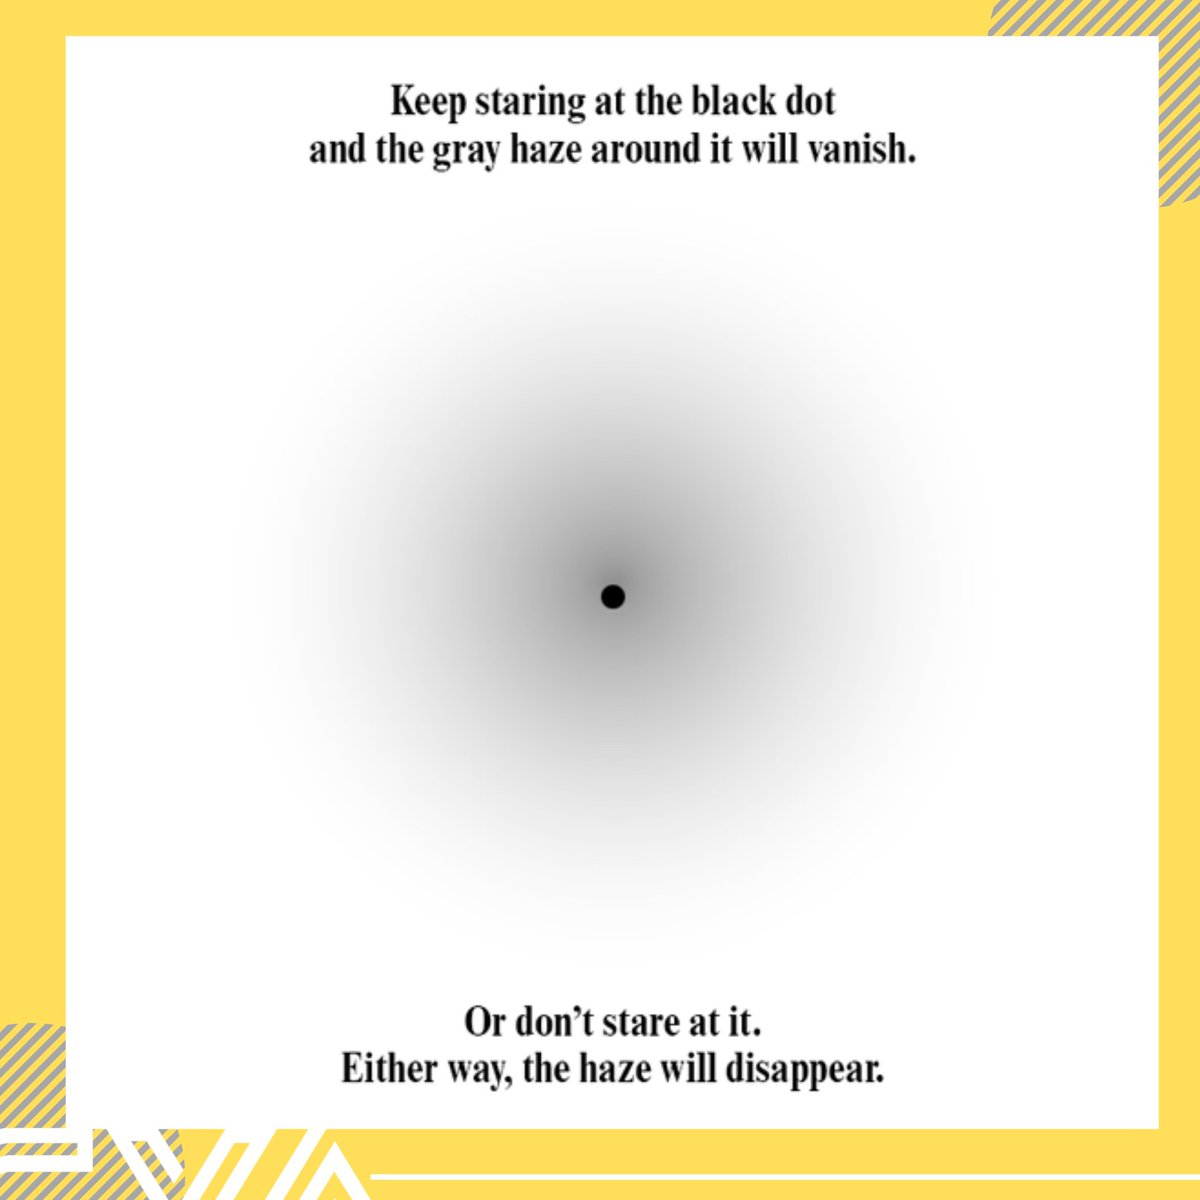 😳KEEP STARING AT THE BLACK 
DOT FOR THE GRAY HAZE AROUND
 IT WILL VANISH!👀

Or

DON'T STARE AT IT. 
EITHER WAY, THE HAZE WILL DISAPPEAR!

facebook.com/CrackerjacksVi… 
linkedin.com/in/crackerjack… 

#ProjectManagement #DigitalMarketing #eCommerceSupport #CustomerServiceSupport